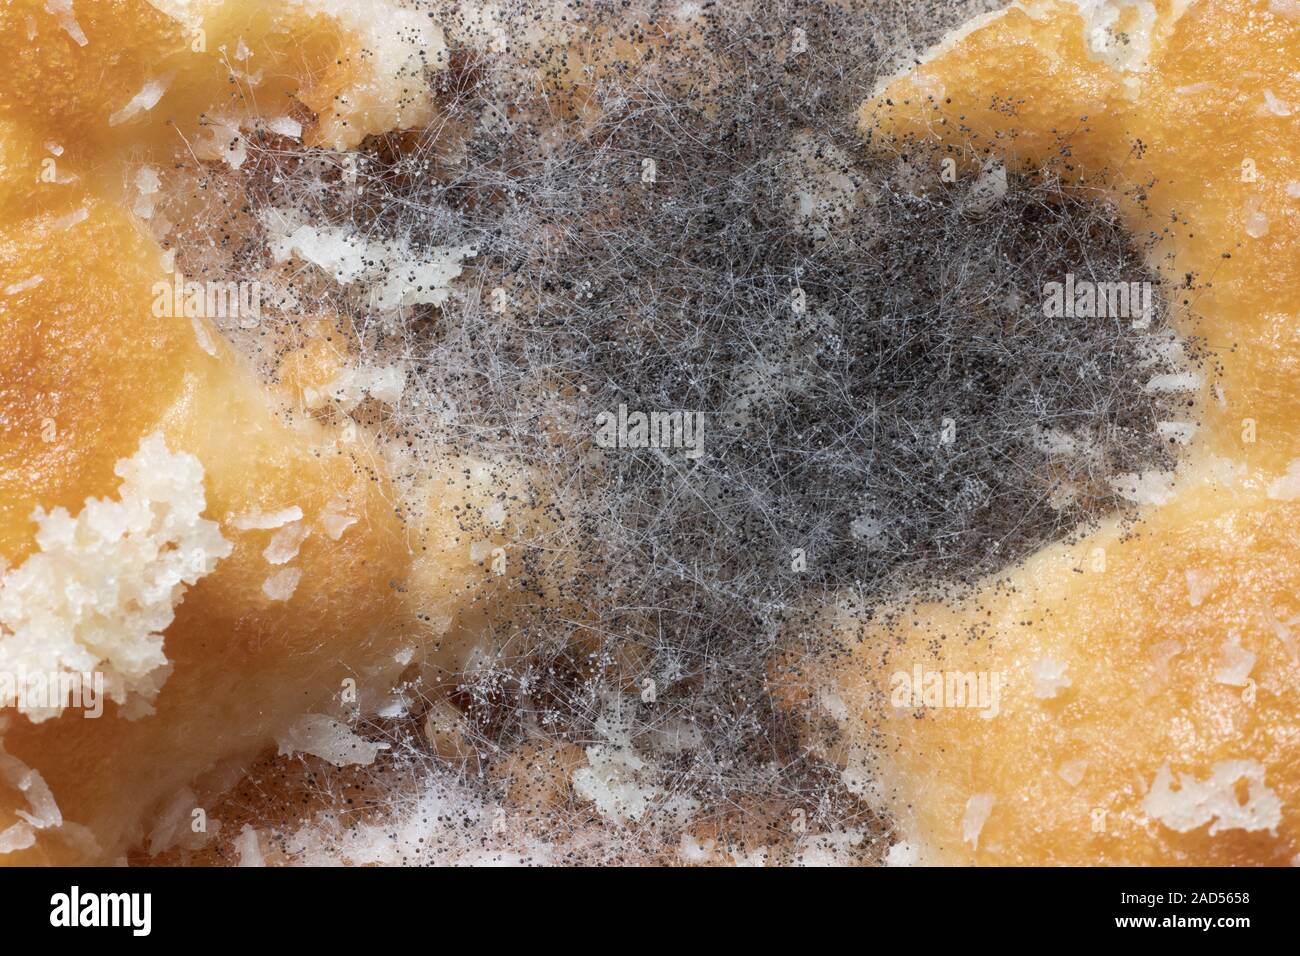 Macro close-up of Bread Mold (Rhizopus) developed over a piece of sugary biscuit. Stock Photo